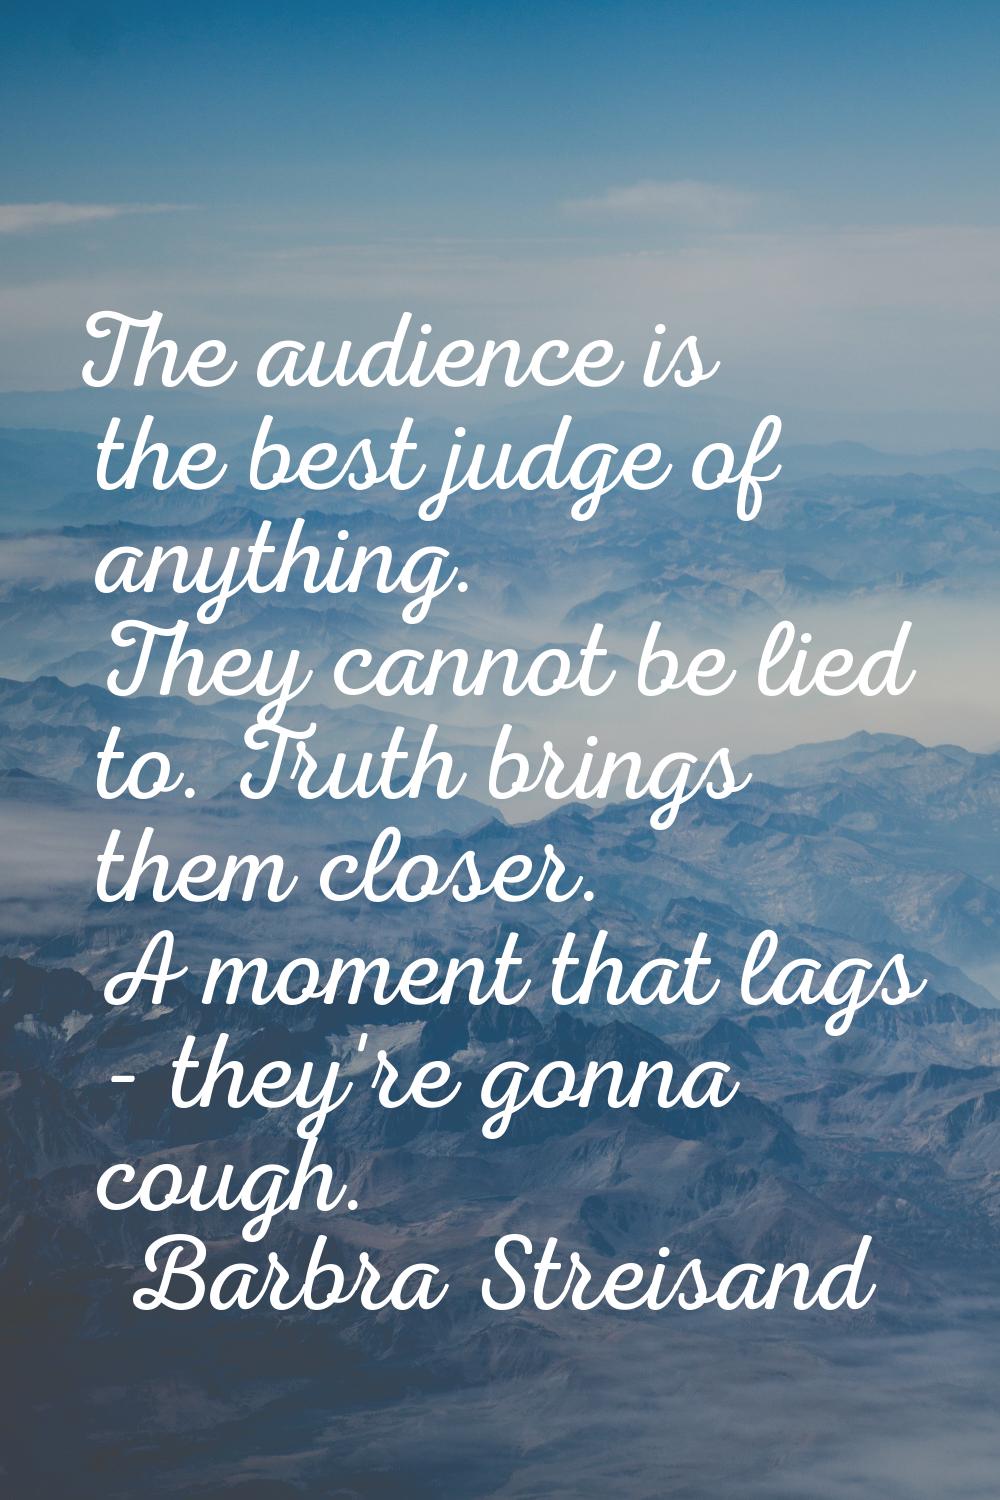 The audience is the best judge of anything. They cannot be lied to. Truth brings them closer. A mom